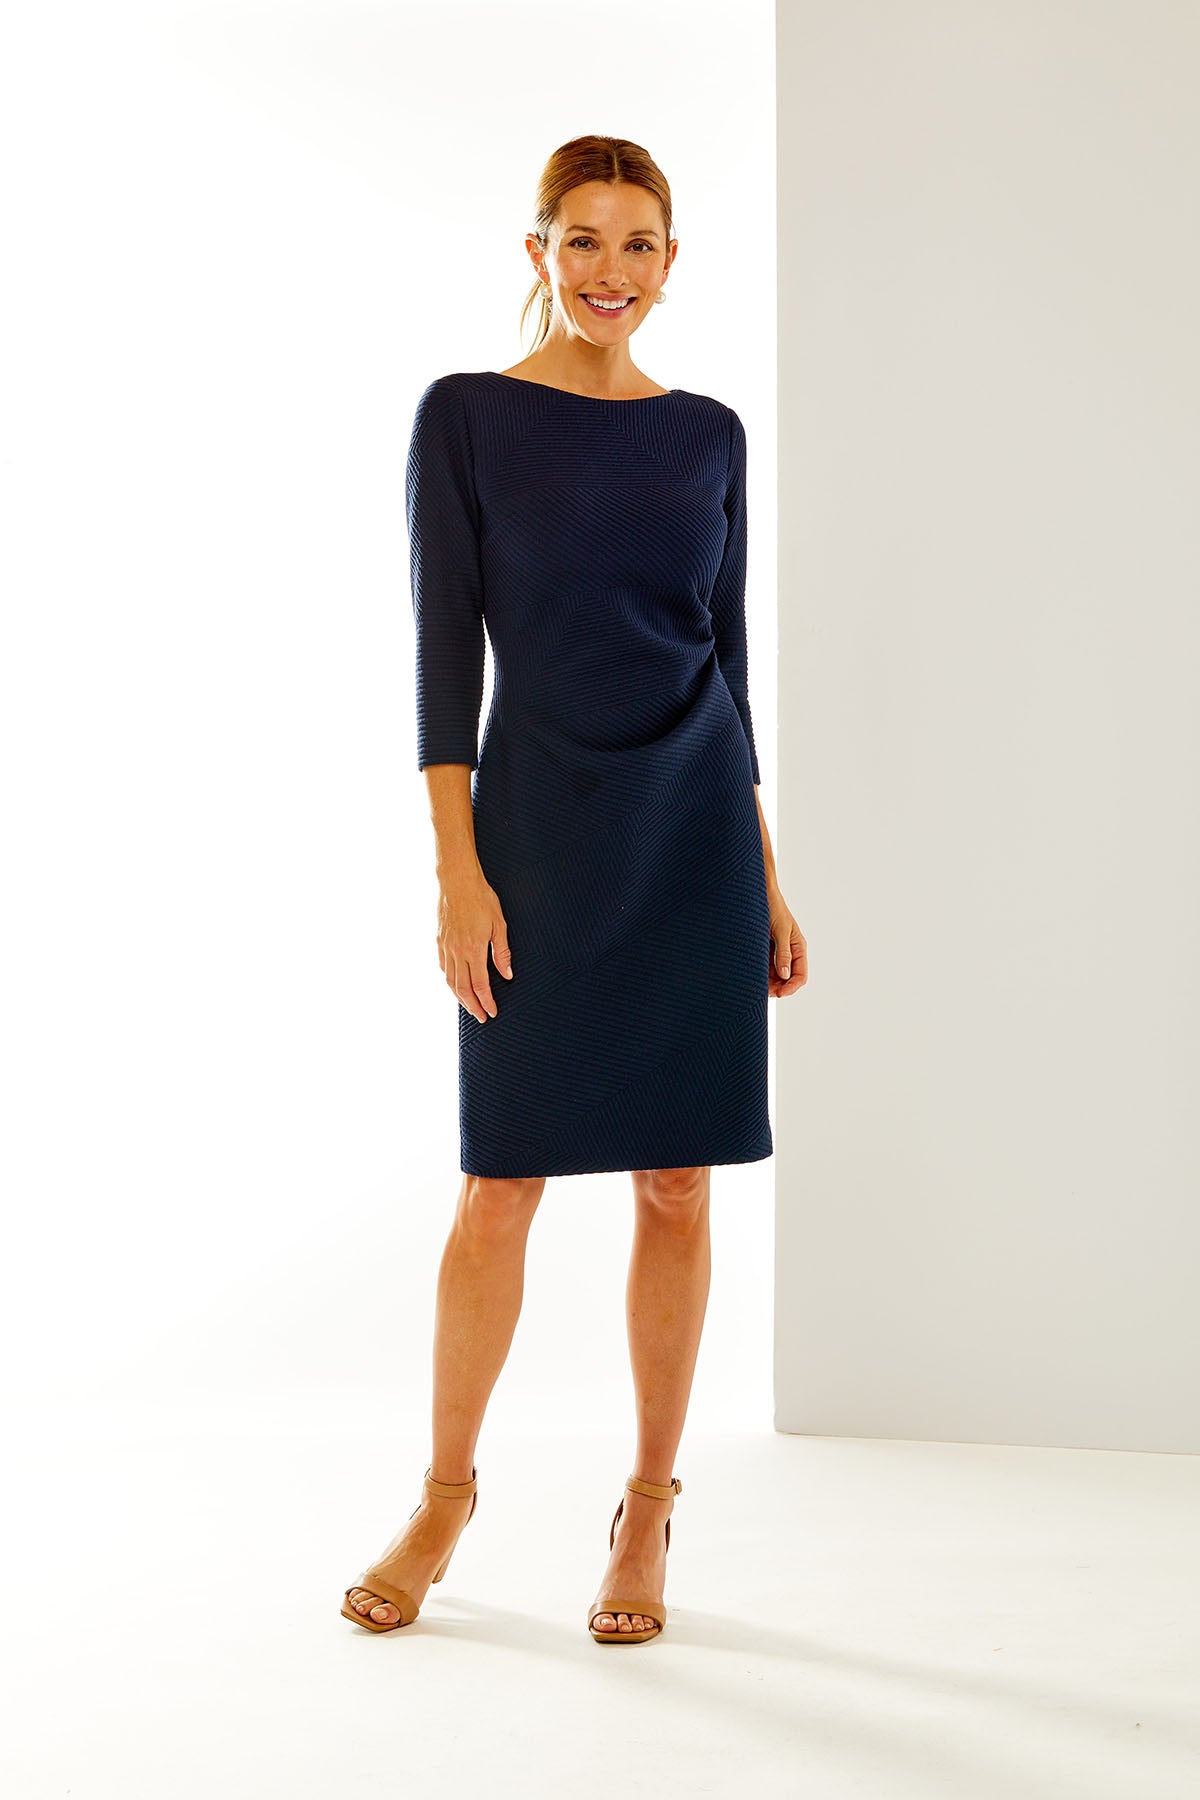 Woman in navy cocktail dress